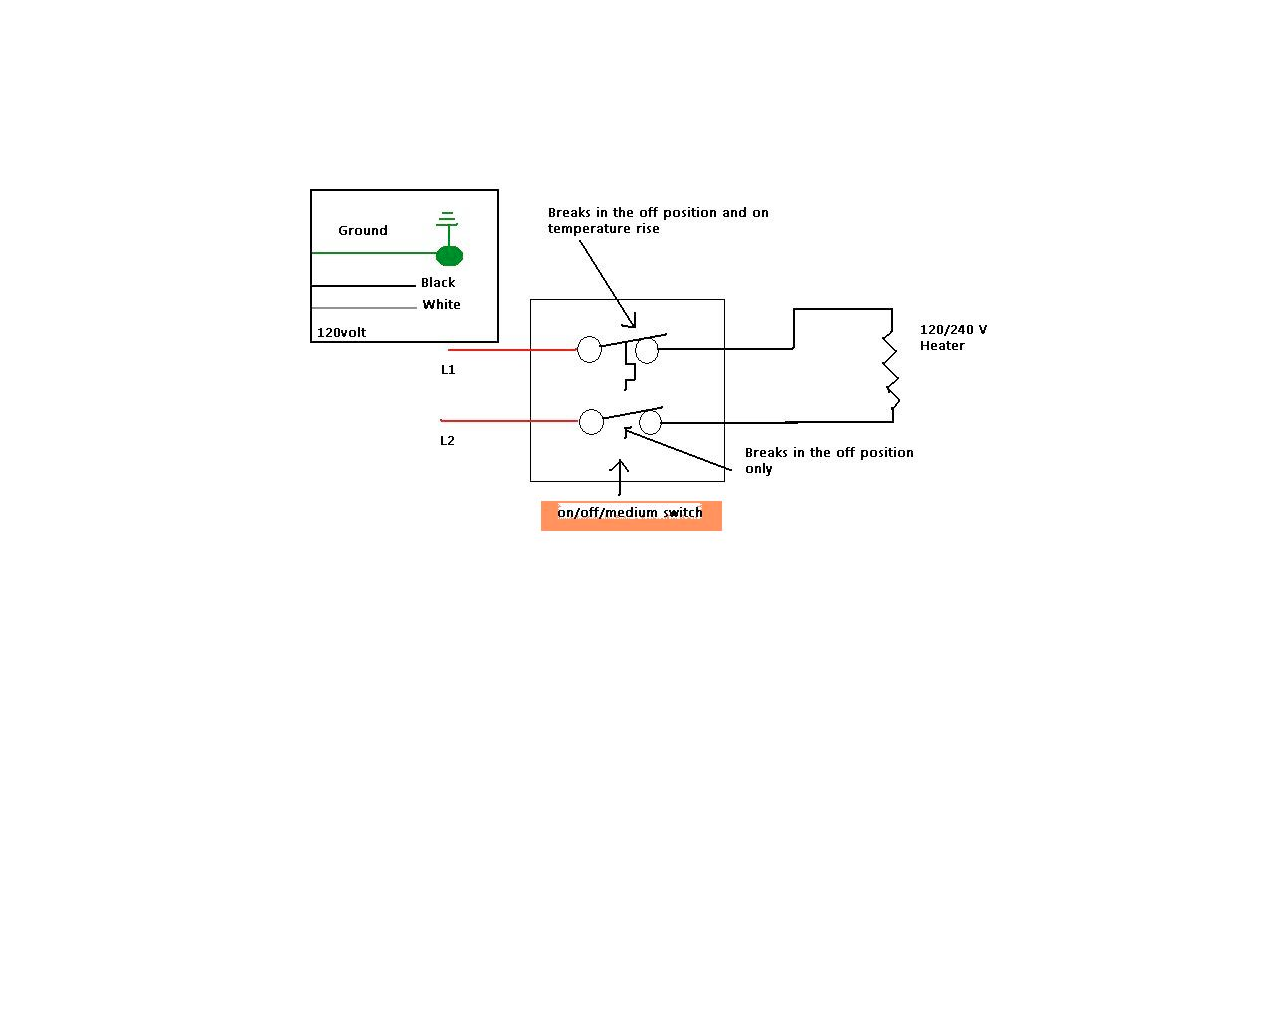 wiring diagram for 220 volt baseboard heater